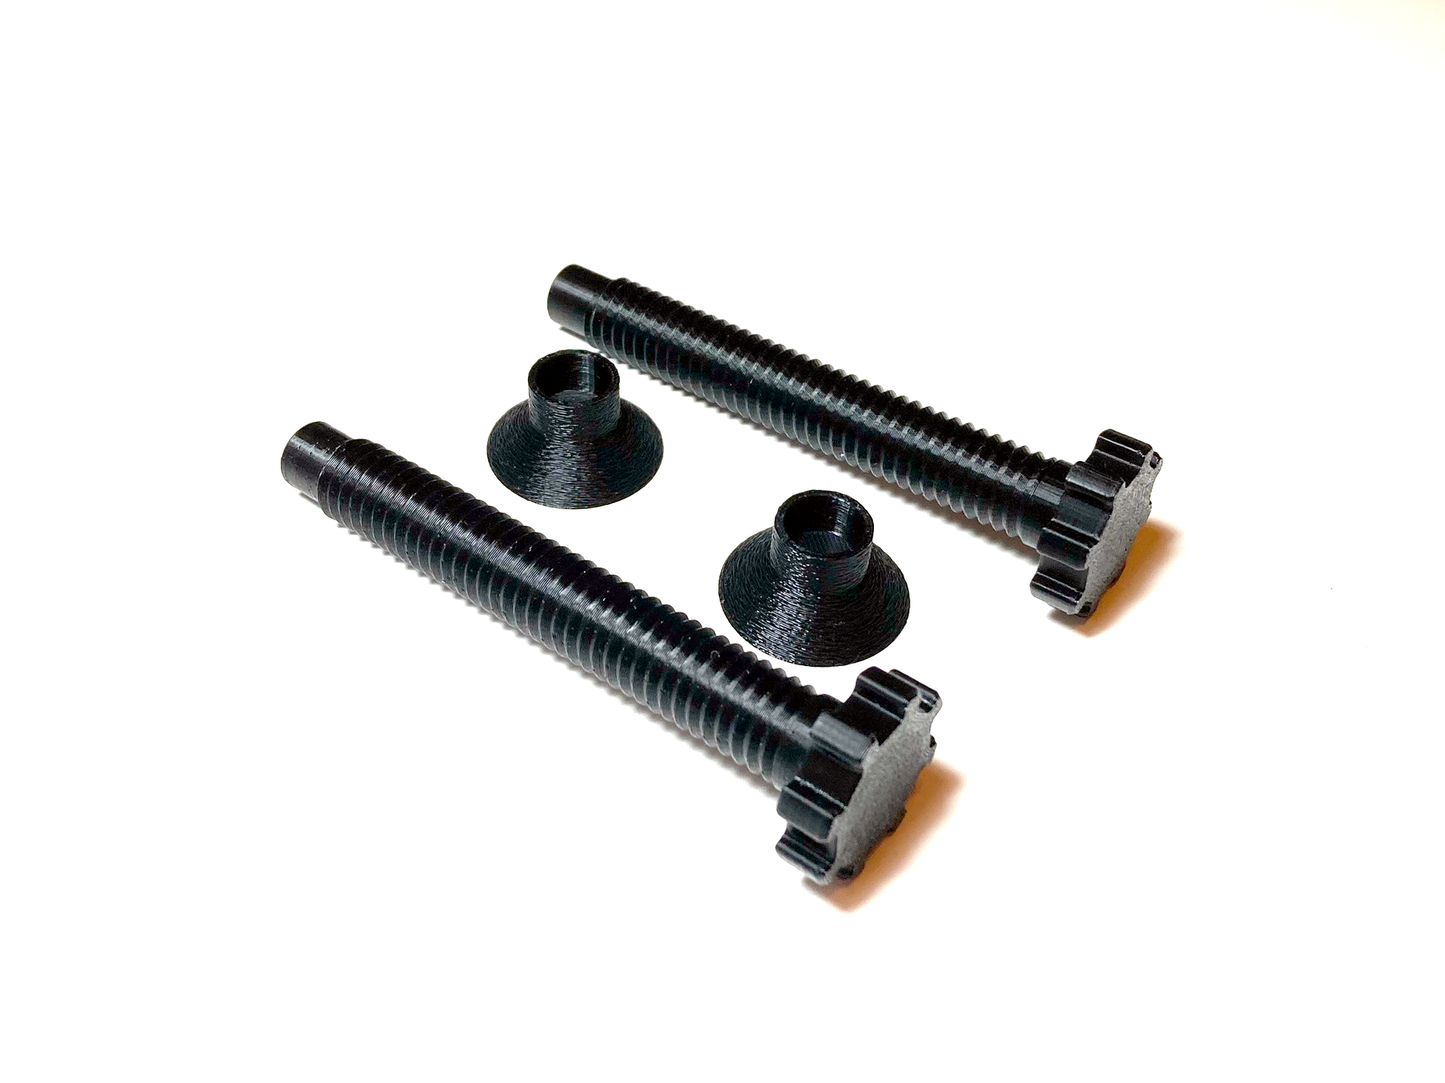 Replacement Screw for Desk Clamp (pack of two)